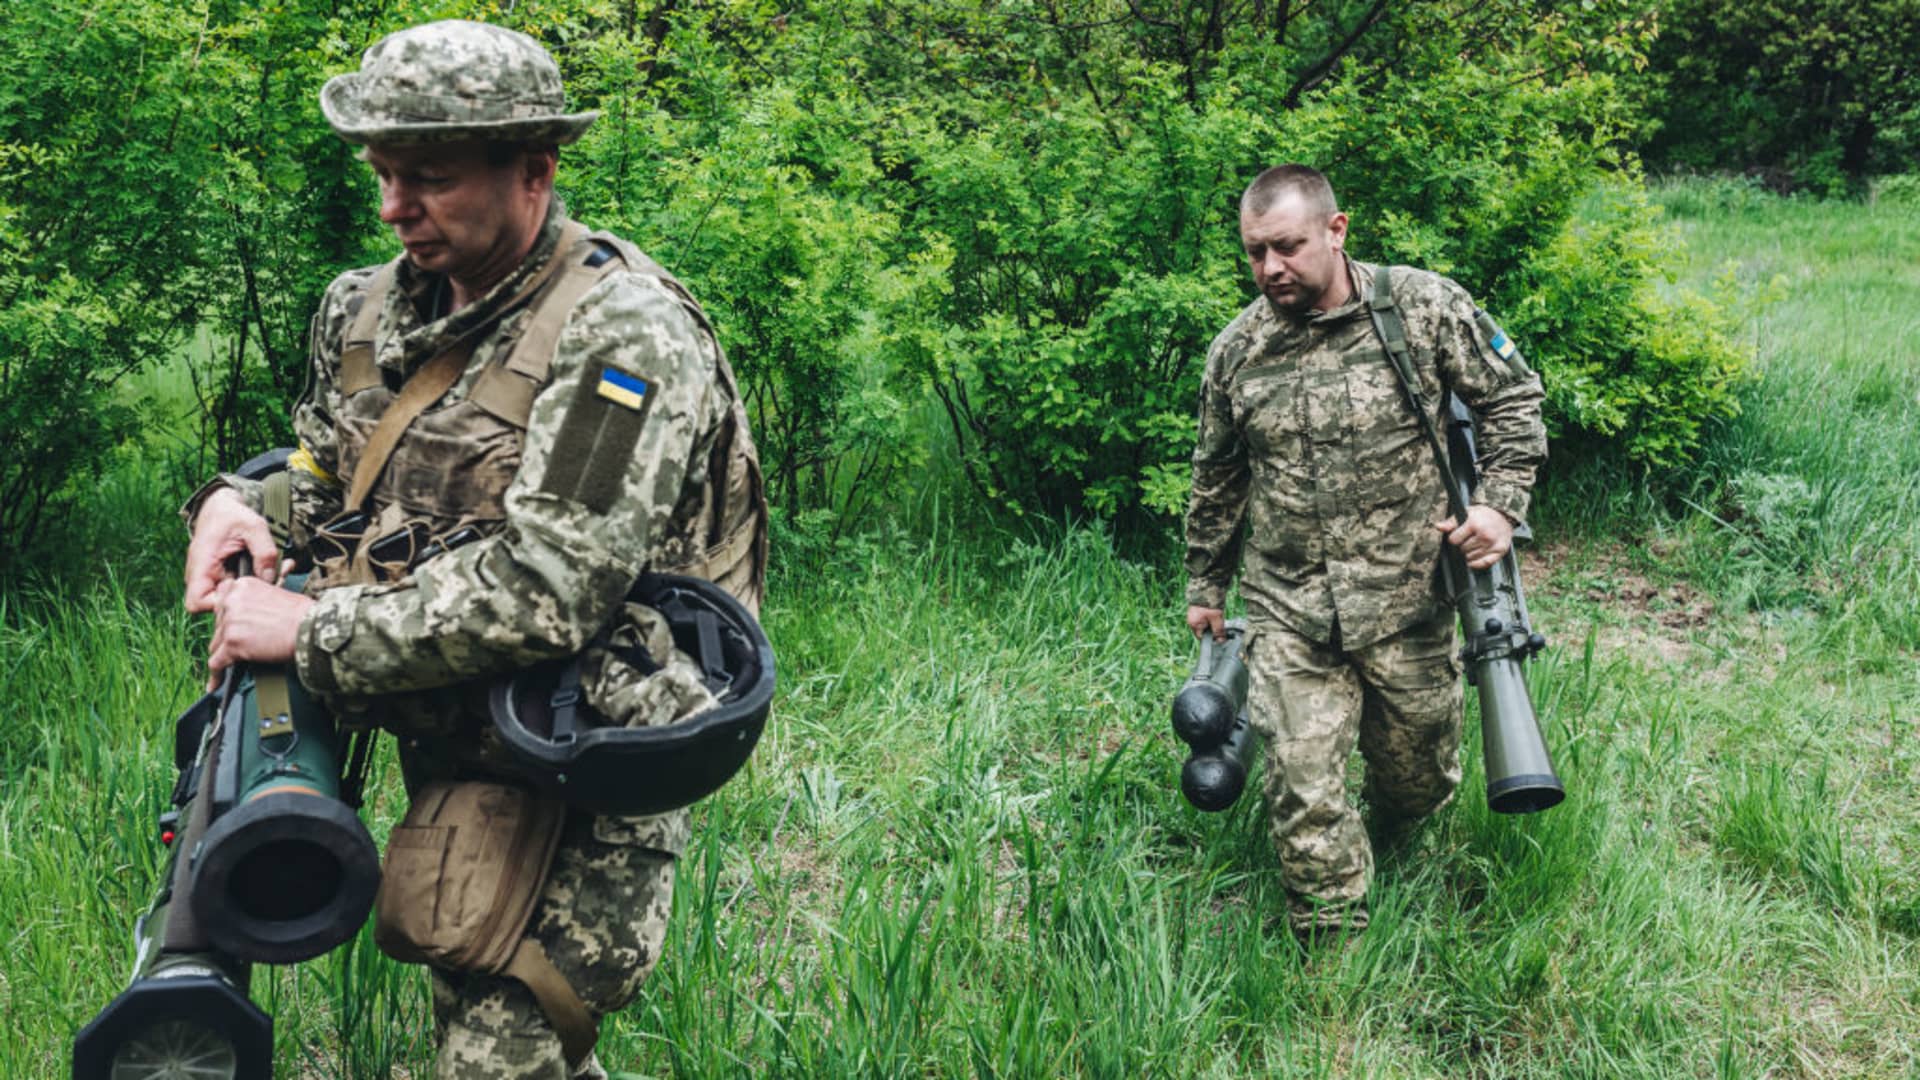 Ukrainian soldiers are seen with new military weapons in Donetsk Oblast, Ukraine on May 14, 2022.